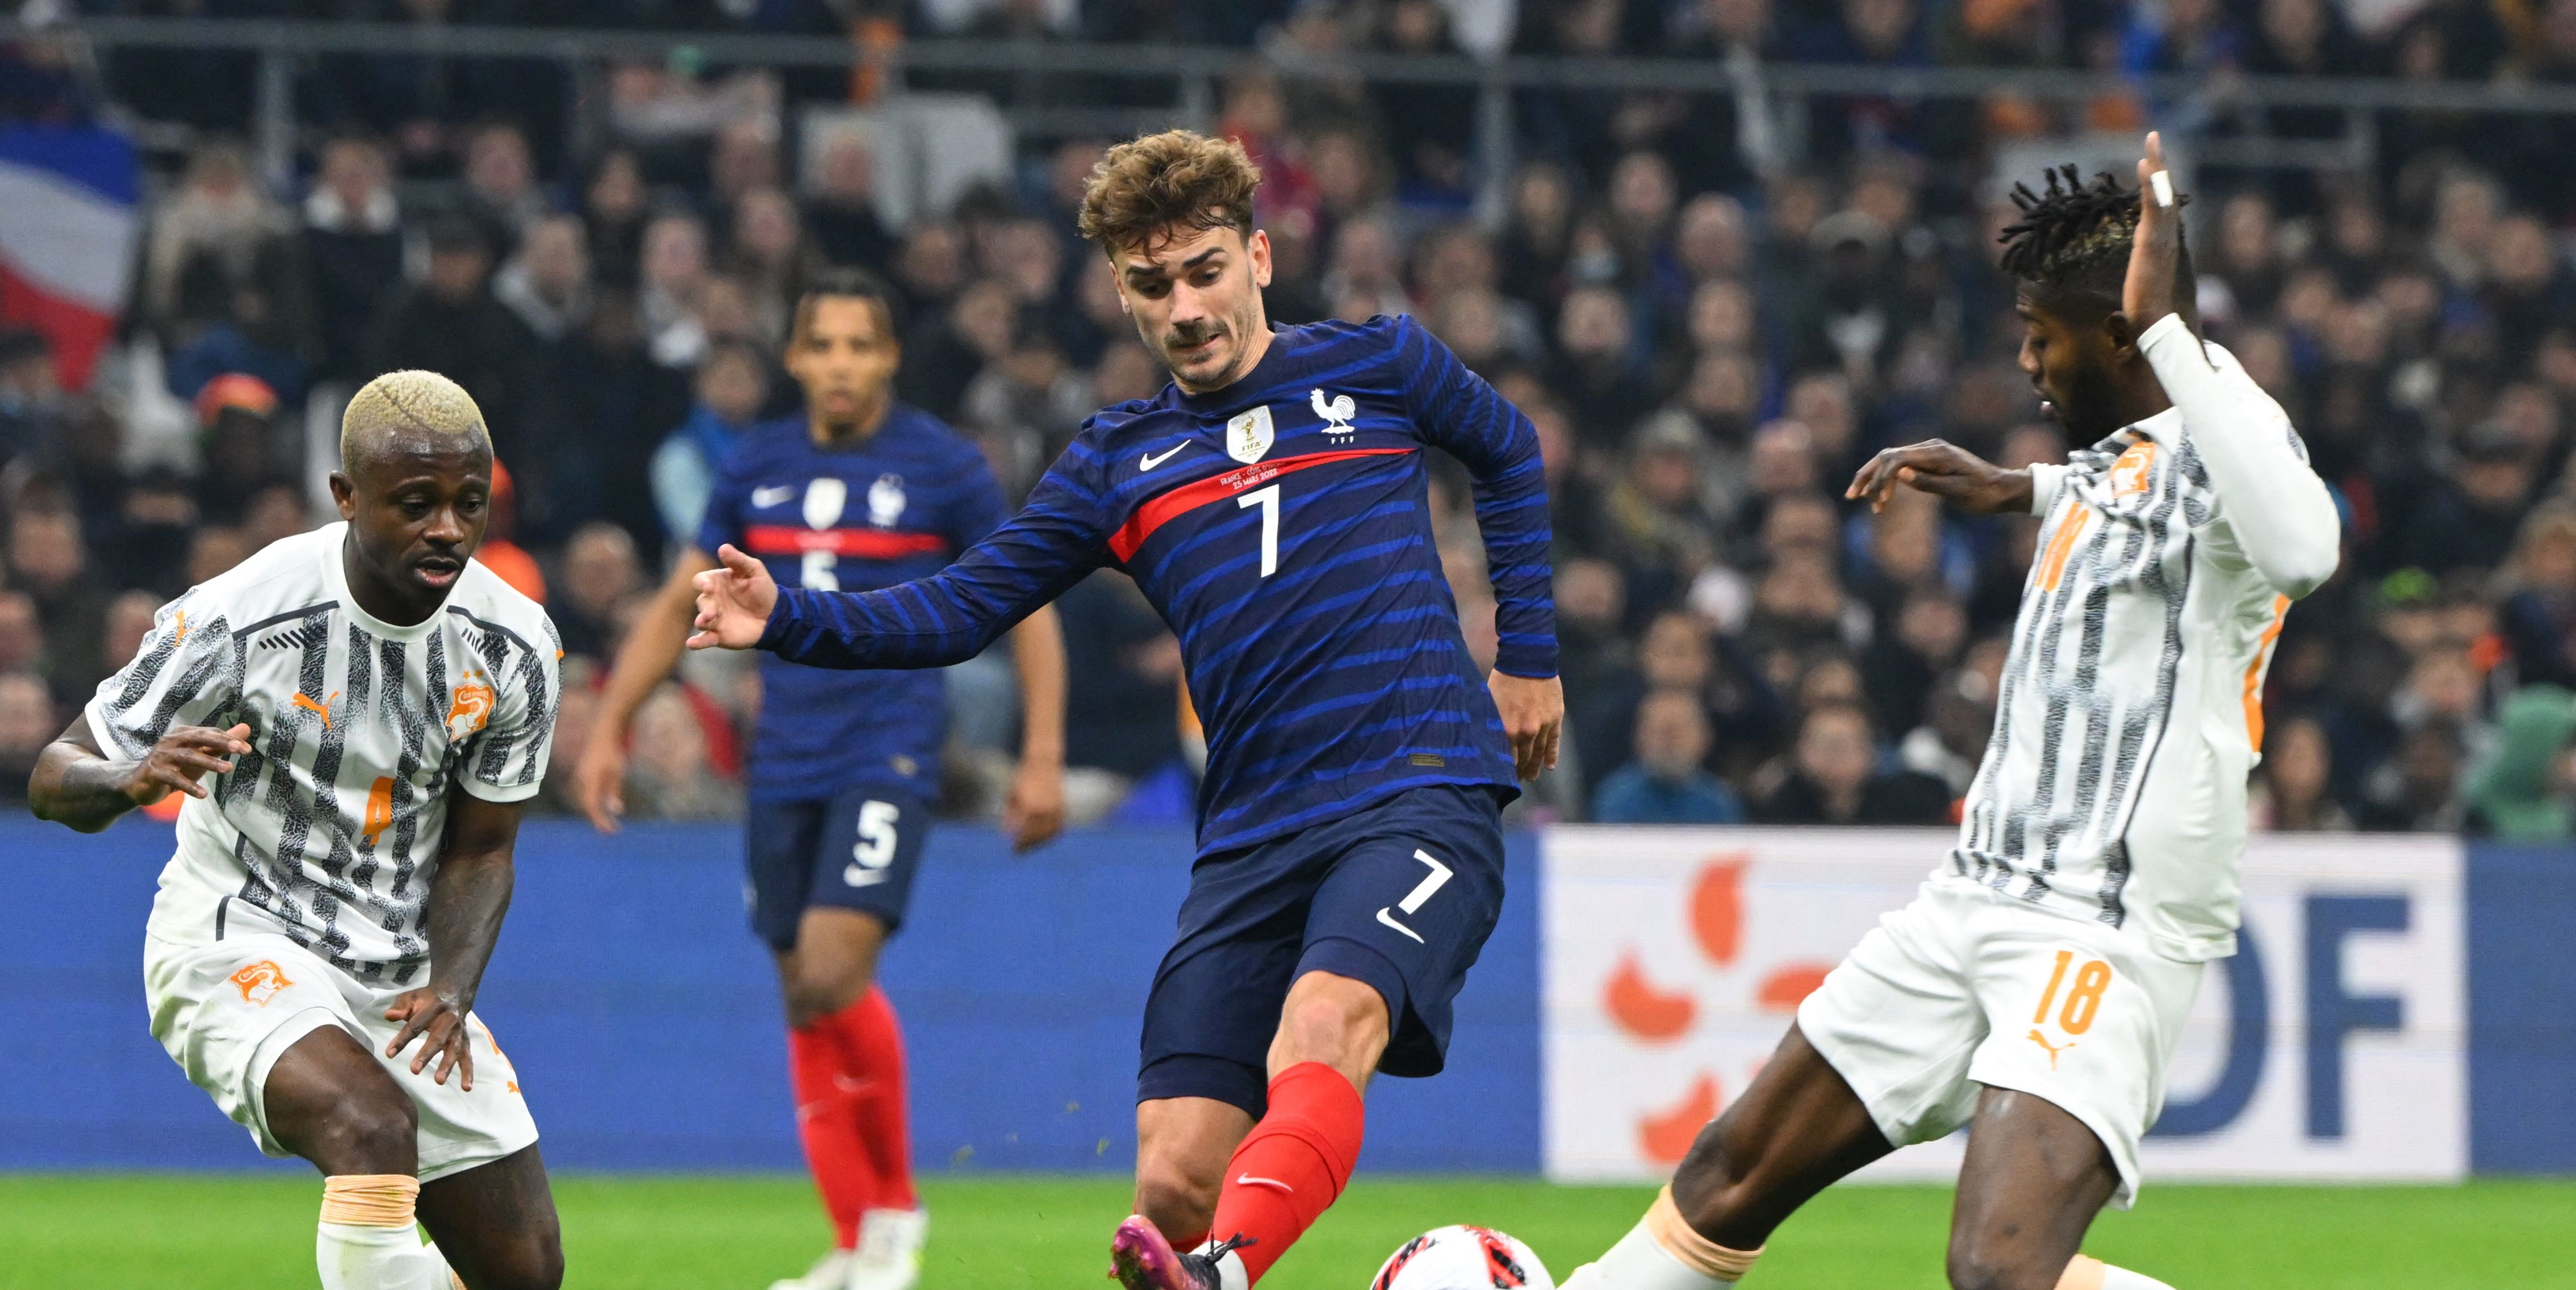 Exclusive: ‘Scouts of Liverpool watched’ – Eredivisie expert, Rik Elfrink, shares glowing review of ‘one of the best players’ in Dutch top-flight